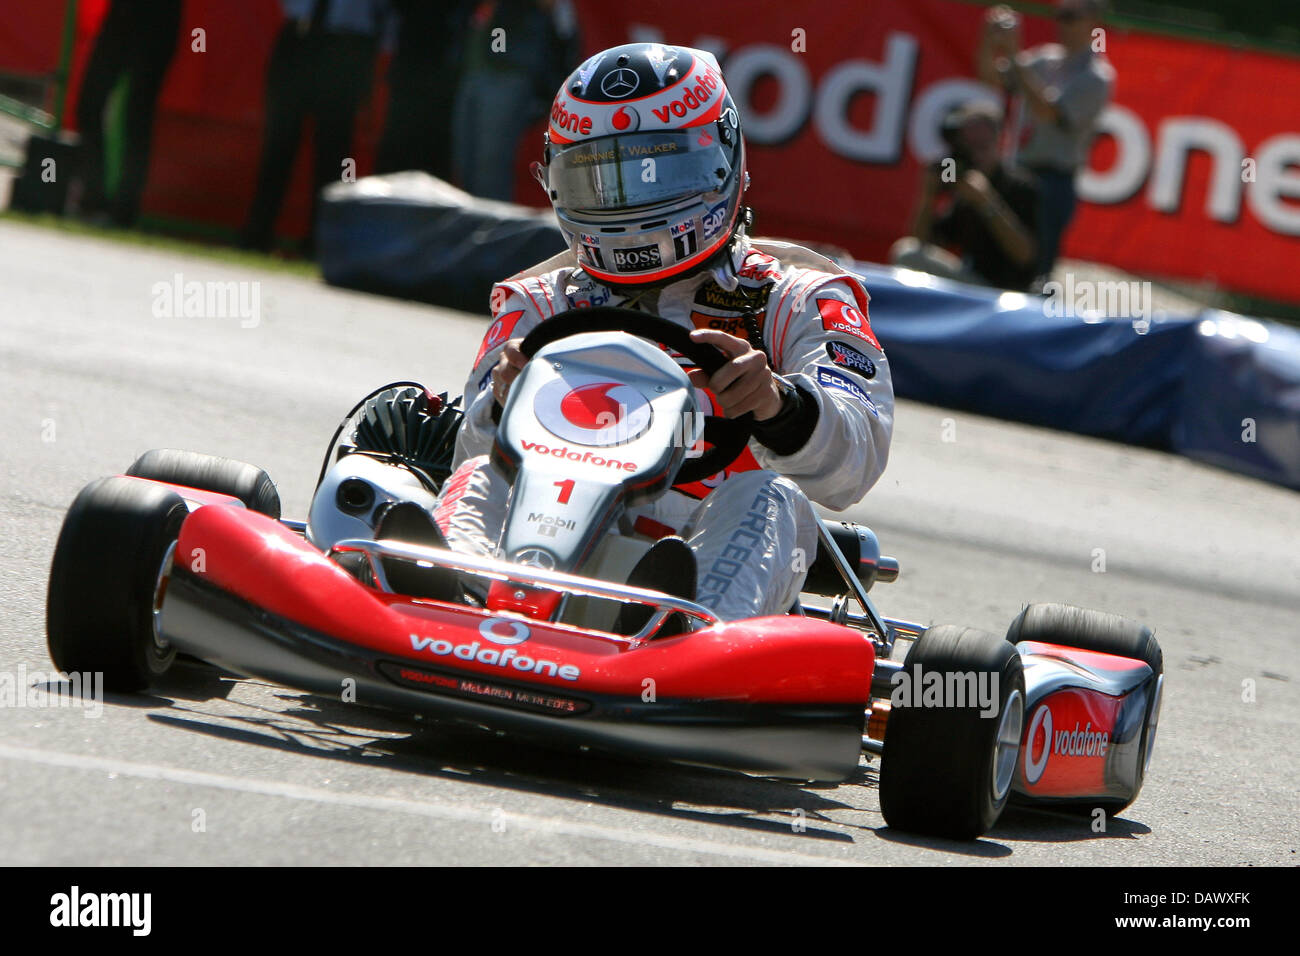 Spanish Formula One driver Fernando Alonso of McLaren Mercedes drives a cart near the race track 'Circuit de Catalunya' in Montmelo near Barcelona, Spain, 10 May 2007. The Grand Prix of Spain takes place on Sunday, 13 May 2007. Photo: CARMEN JASPERSEN Stock Photo